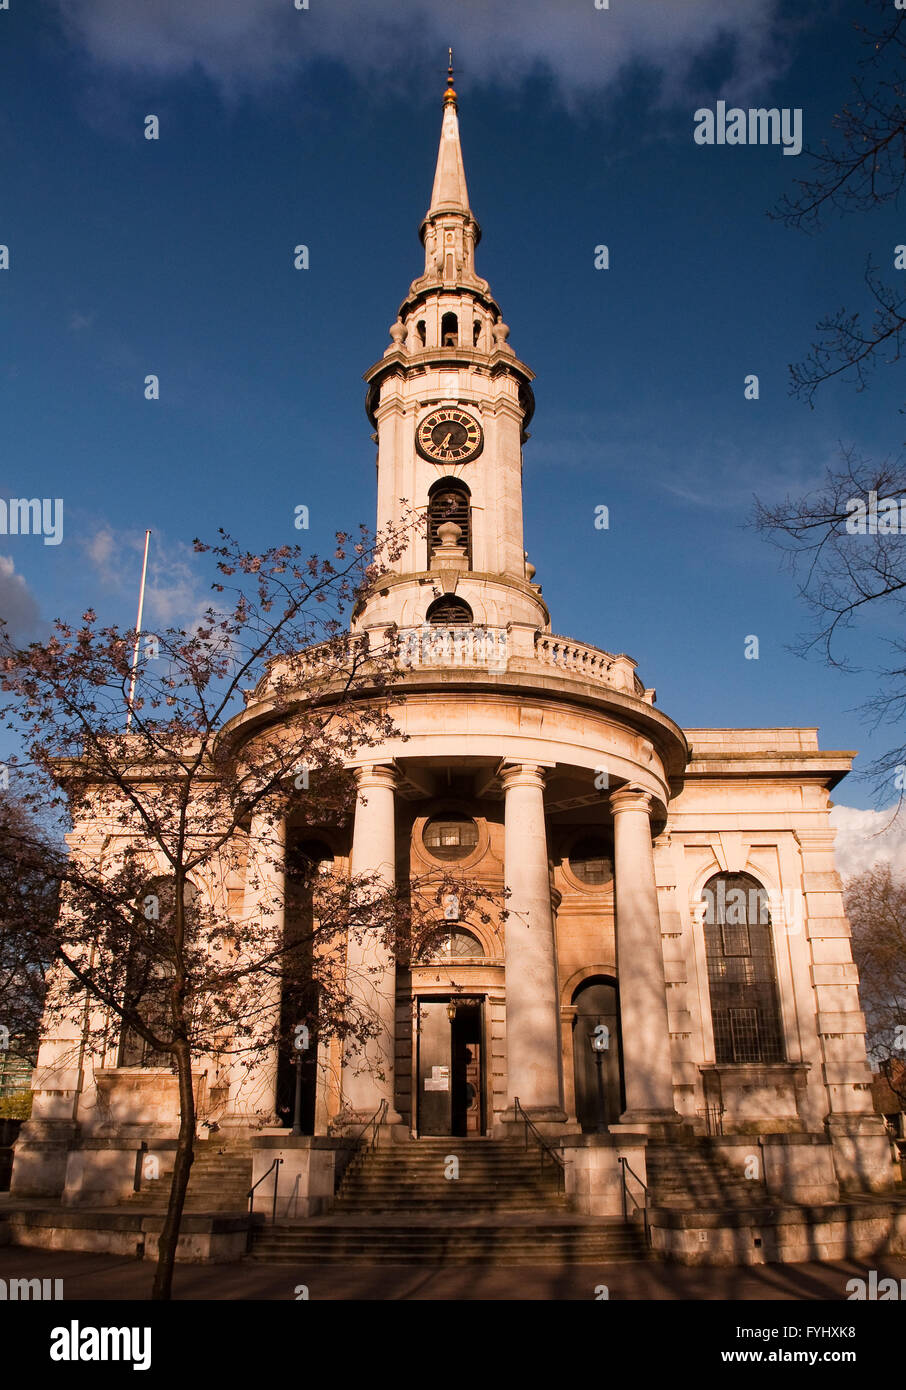 Thomas Archer's Baroque church of St Paul's in Deptford, South East London. Stock Photo